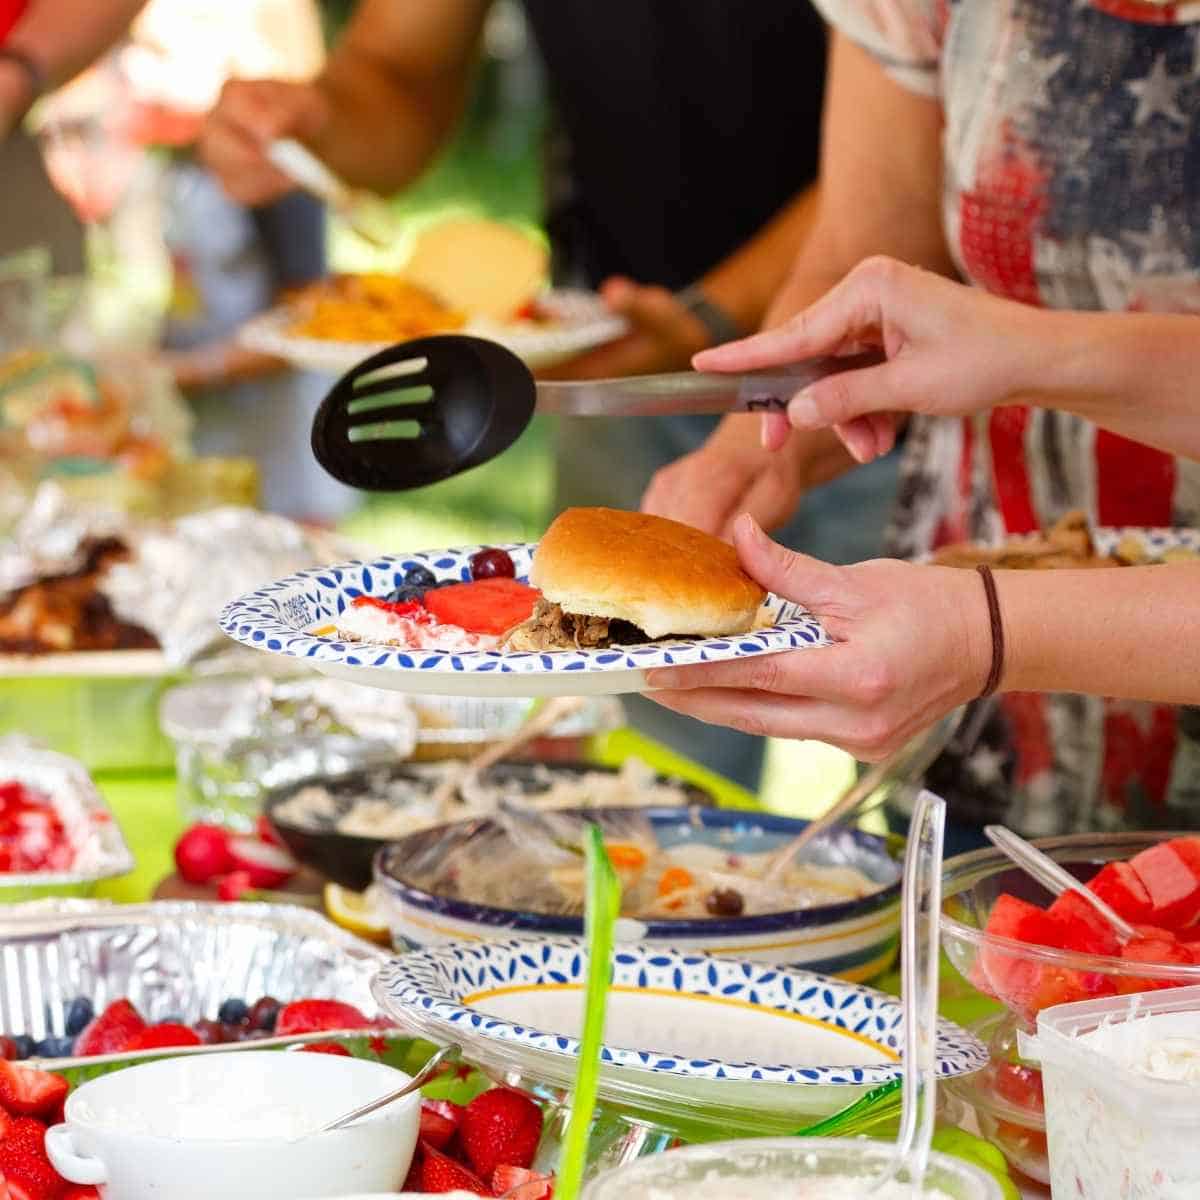 A person dishing up various foods at a buffet style gathering.